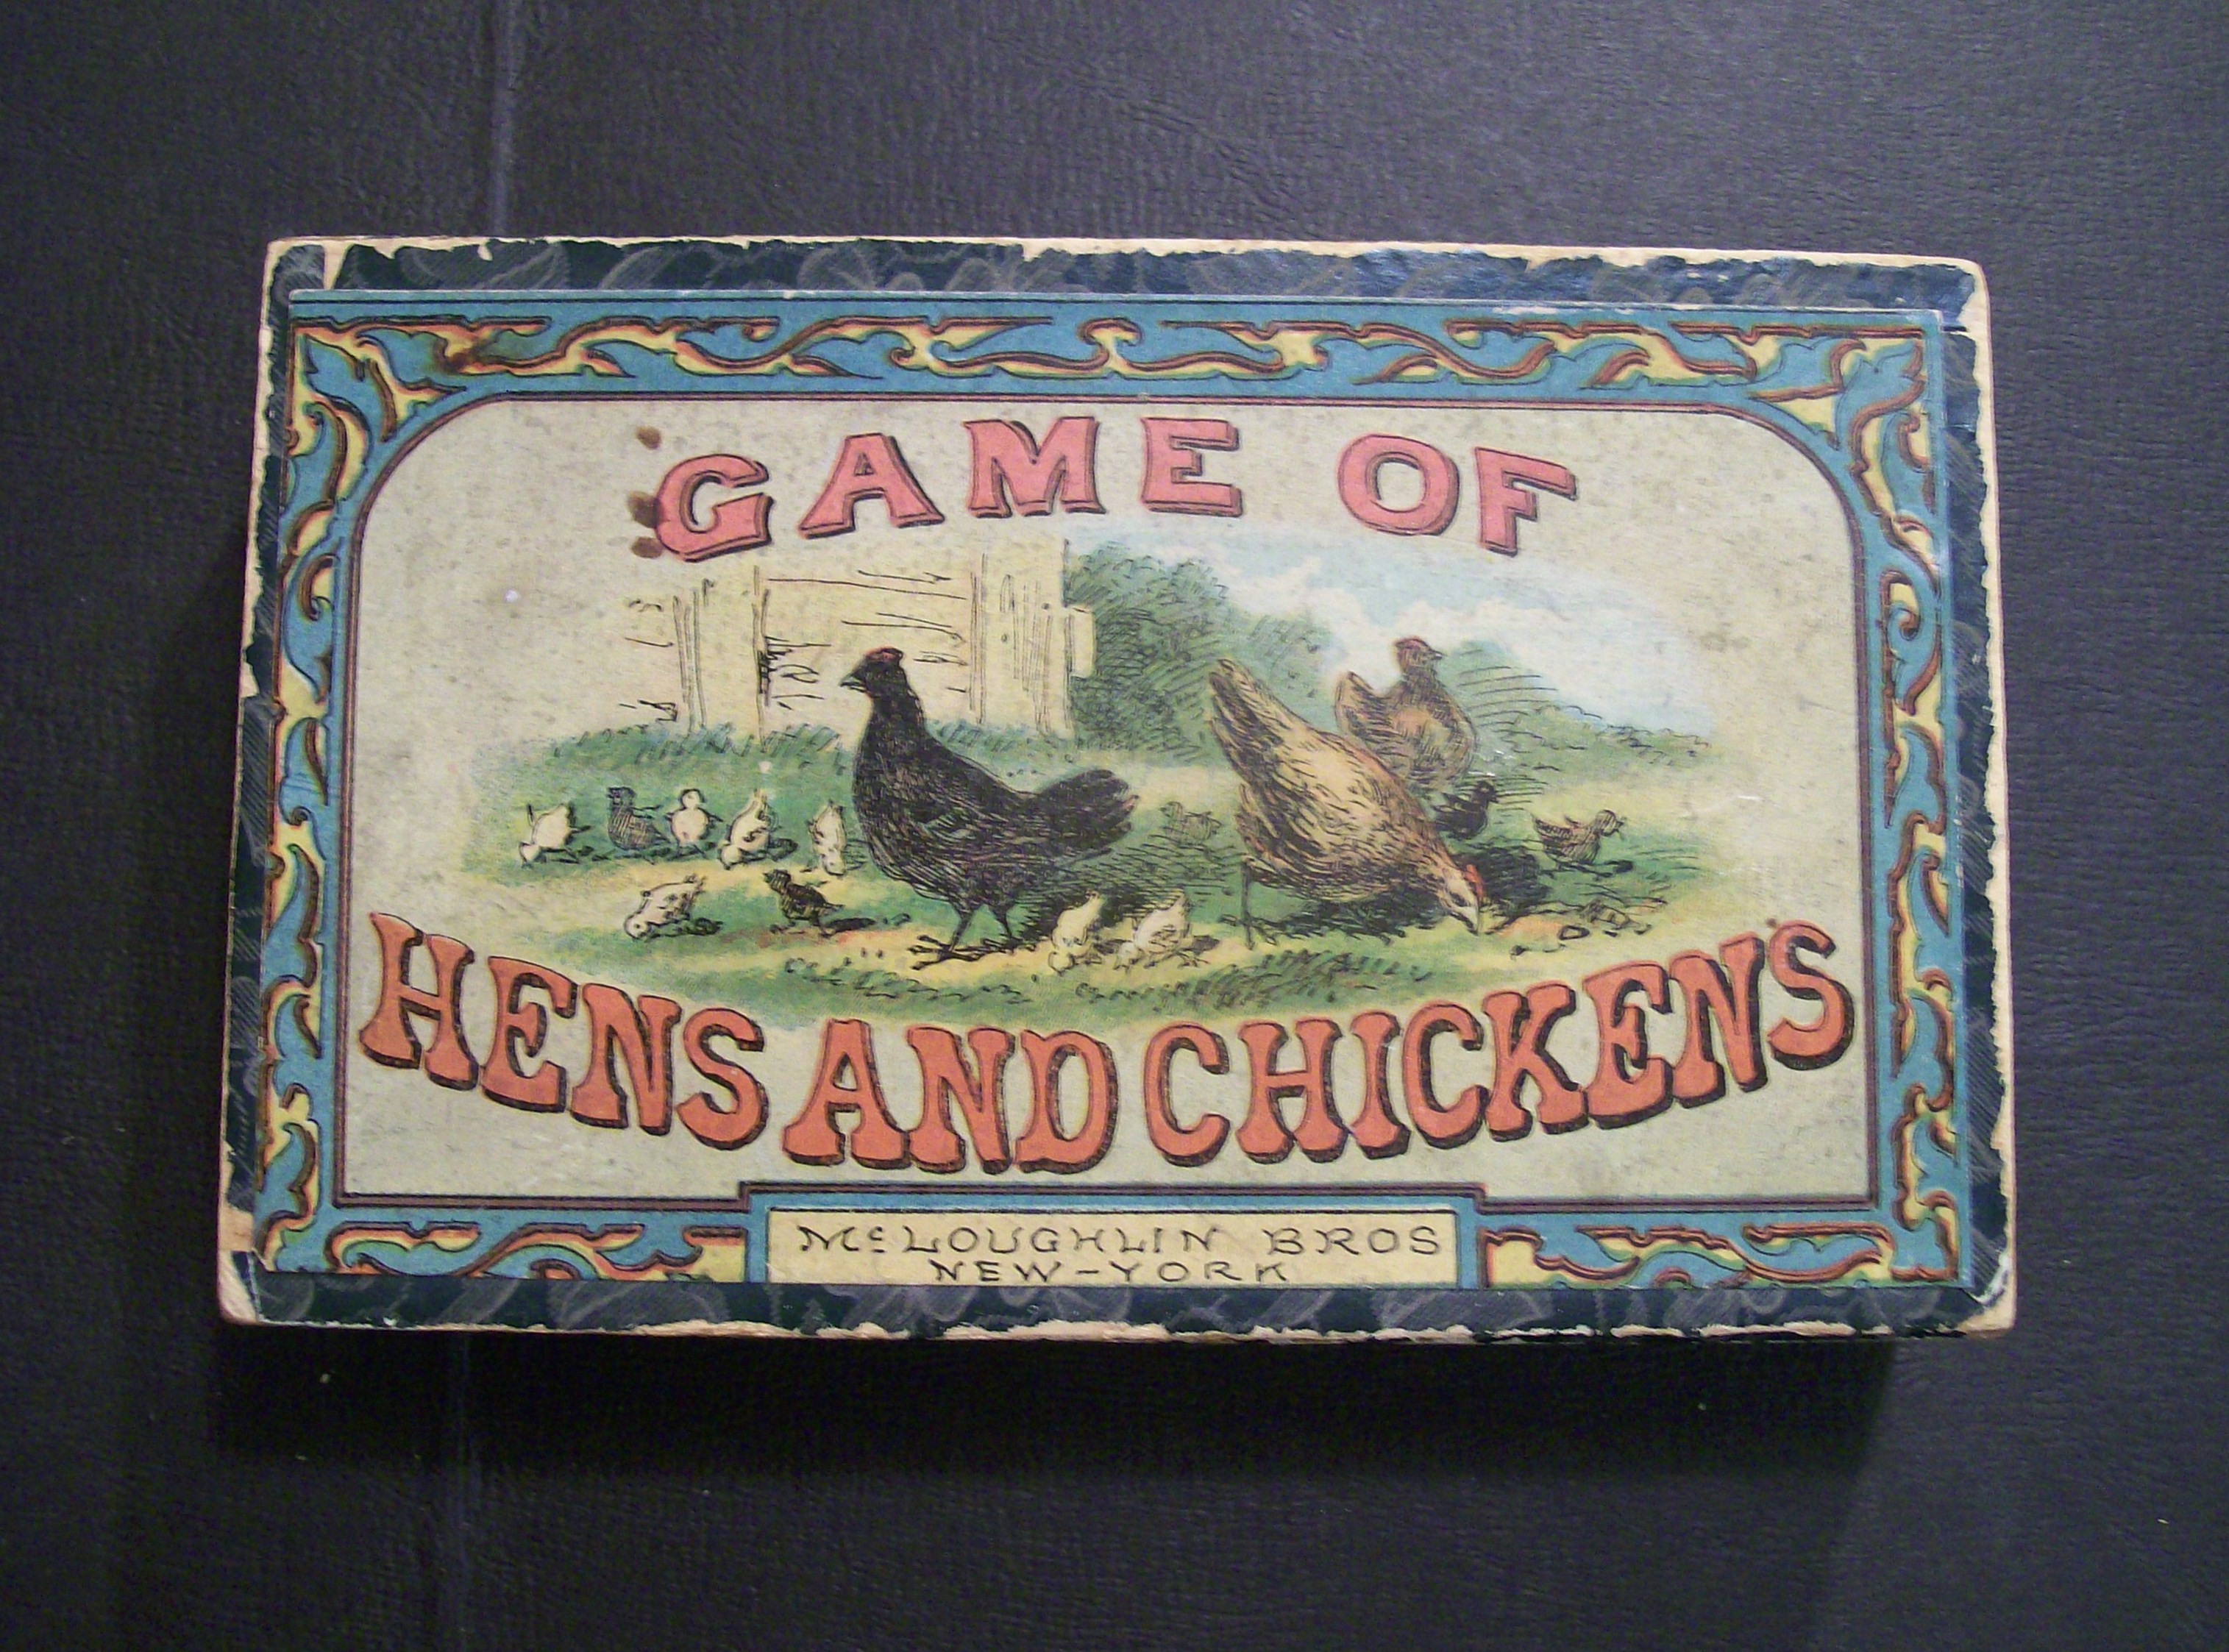 Old 1875 Game of Hens and Chickens by McLoughlin Bros.